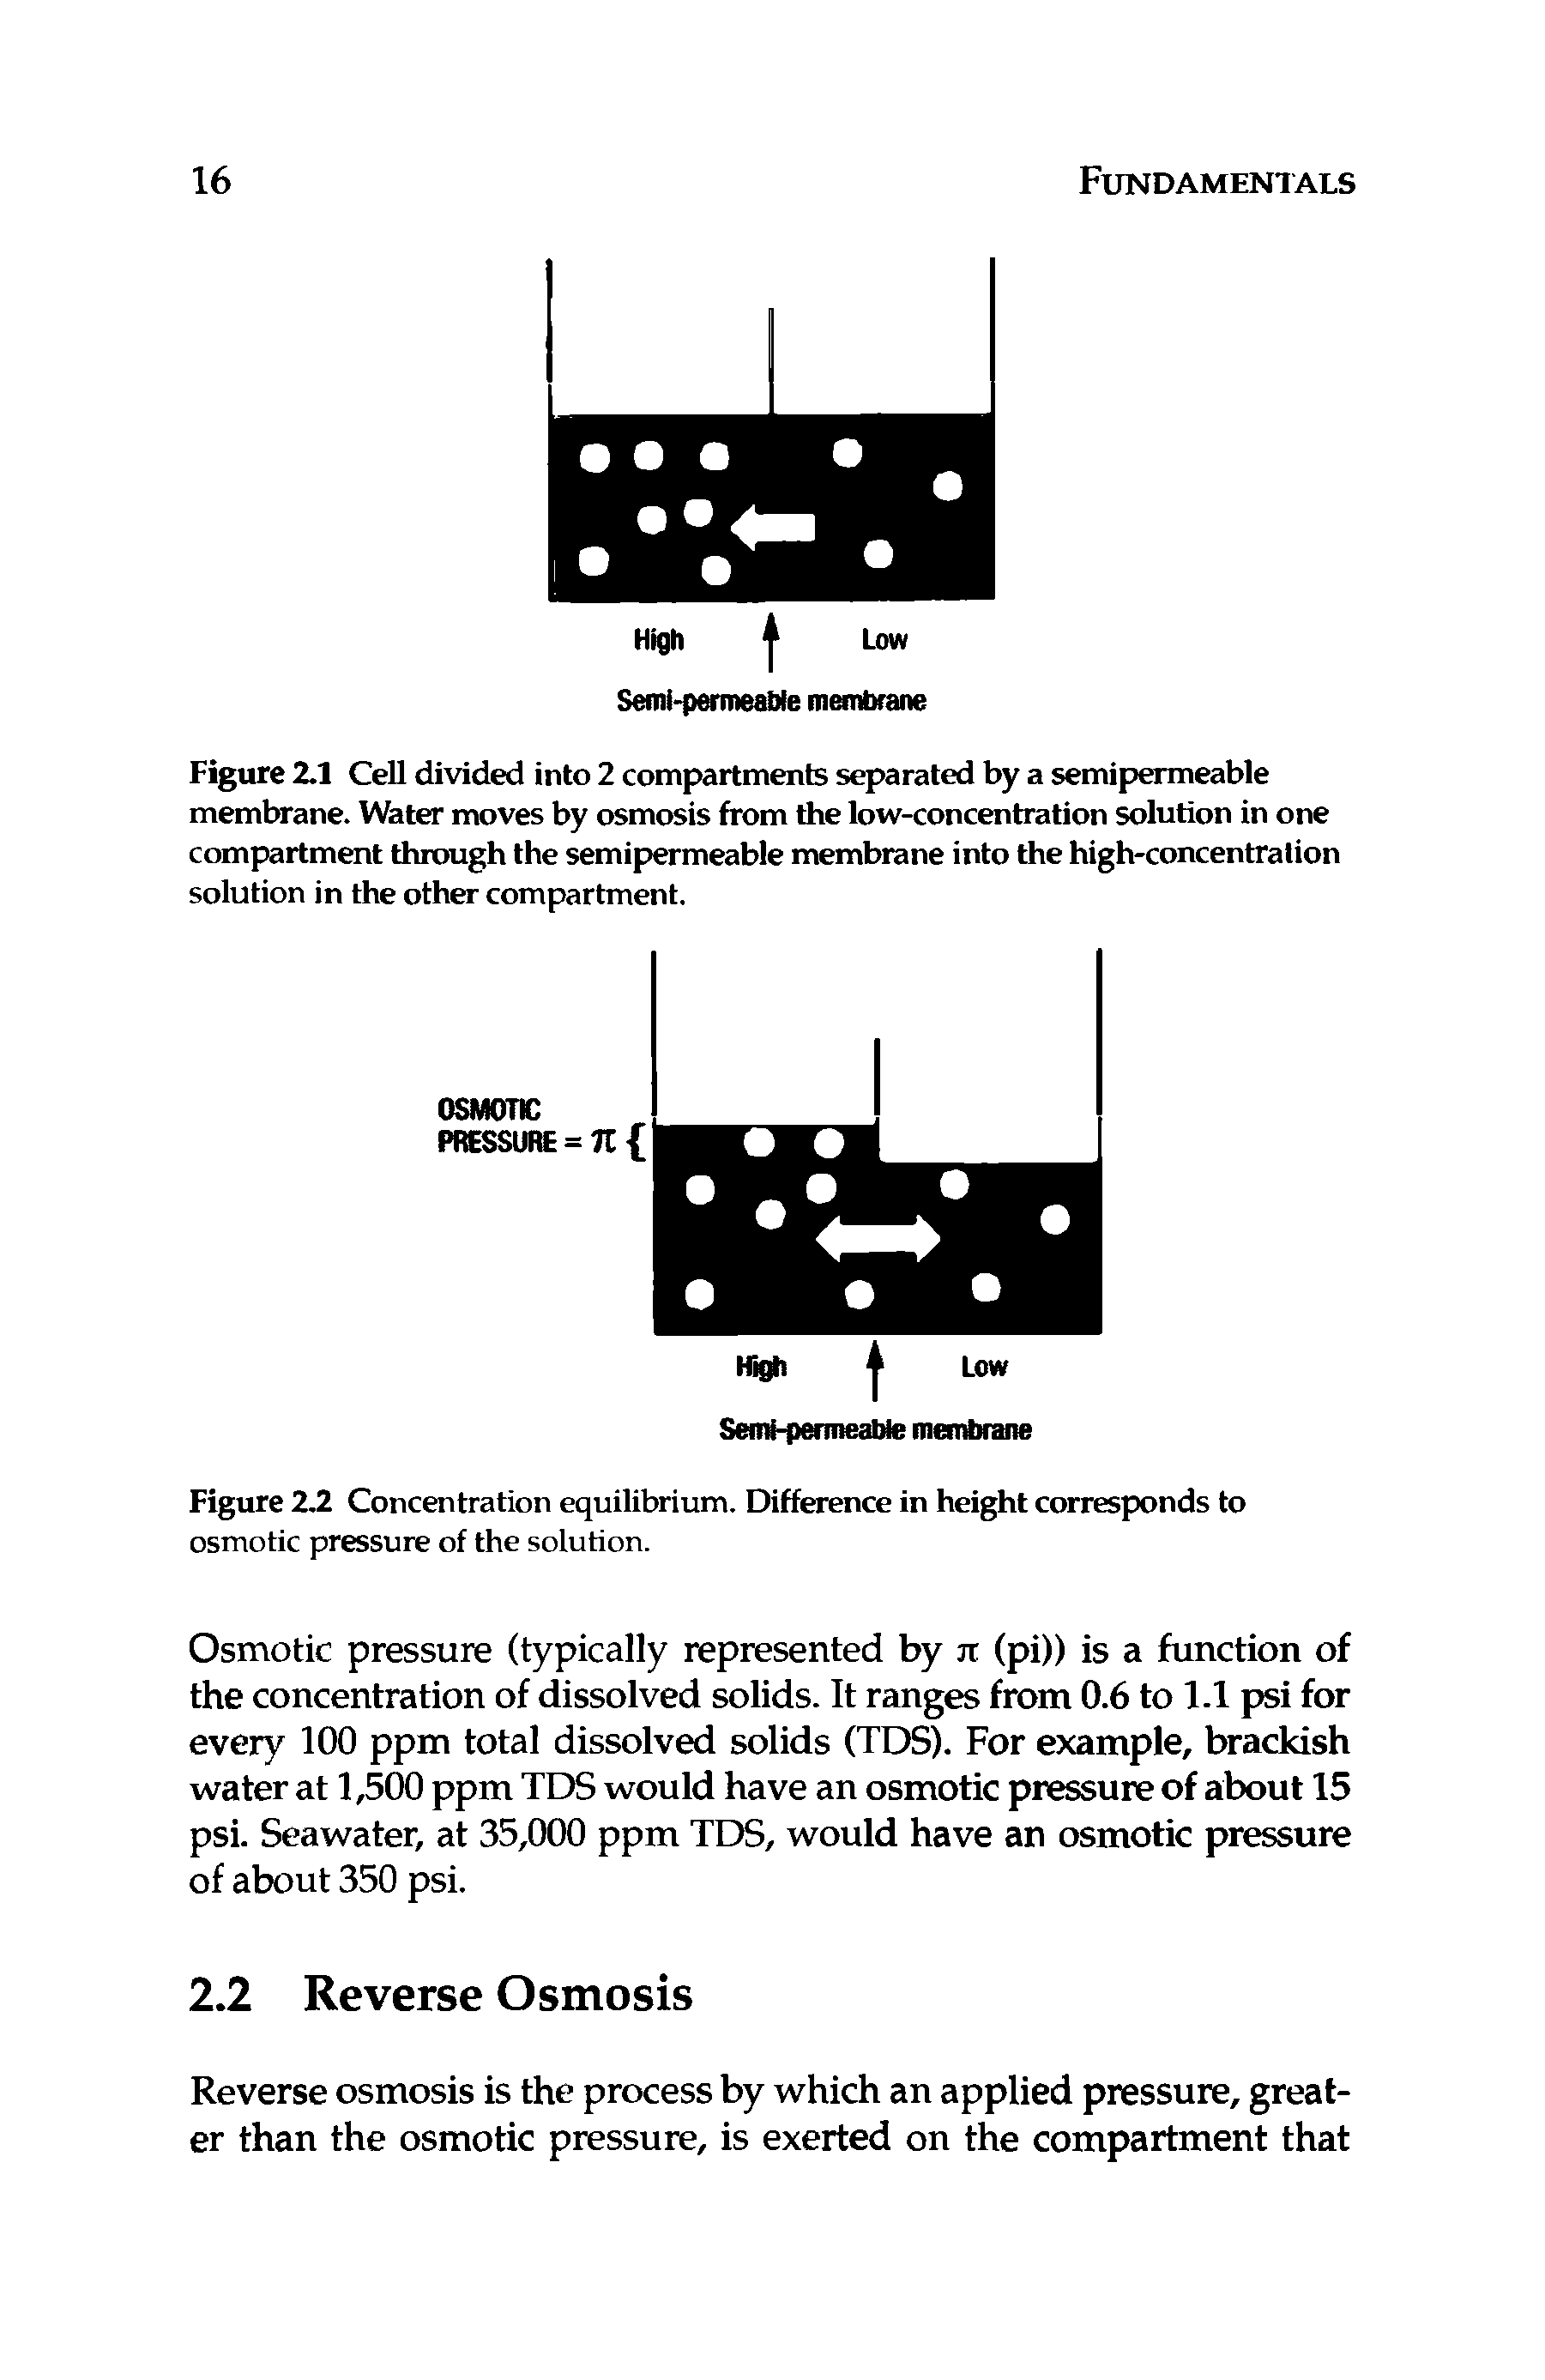 Figure 2.2 Concentration equilibrium. Difference in height corresponds to osmotic pressure of the solution.